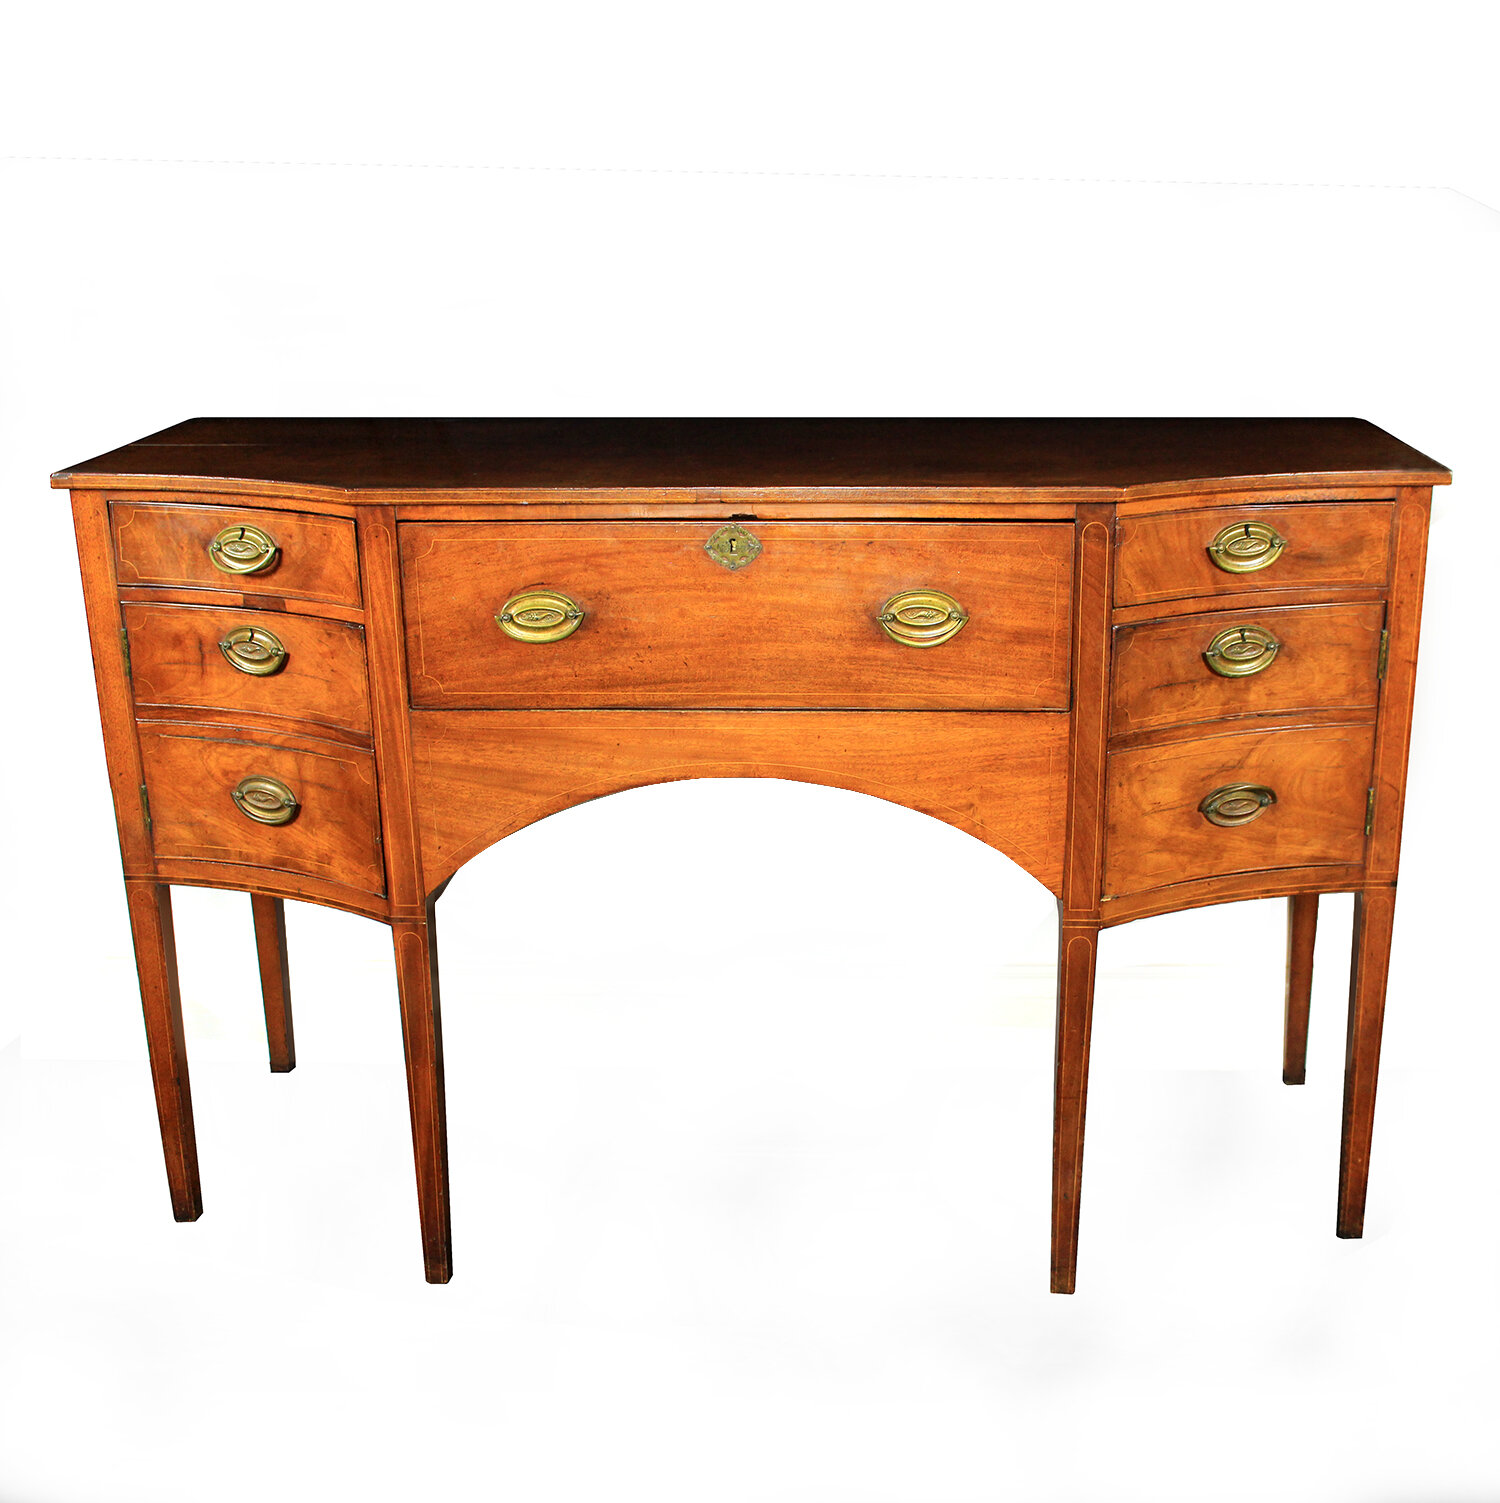 Mahogany Sideboard with Secretaire Drawer, American, Circa 1800